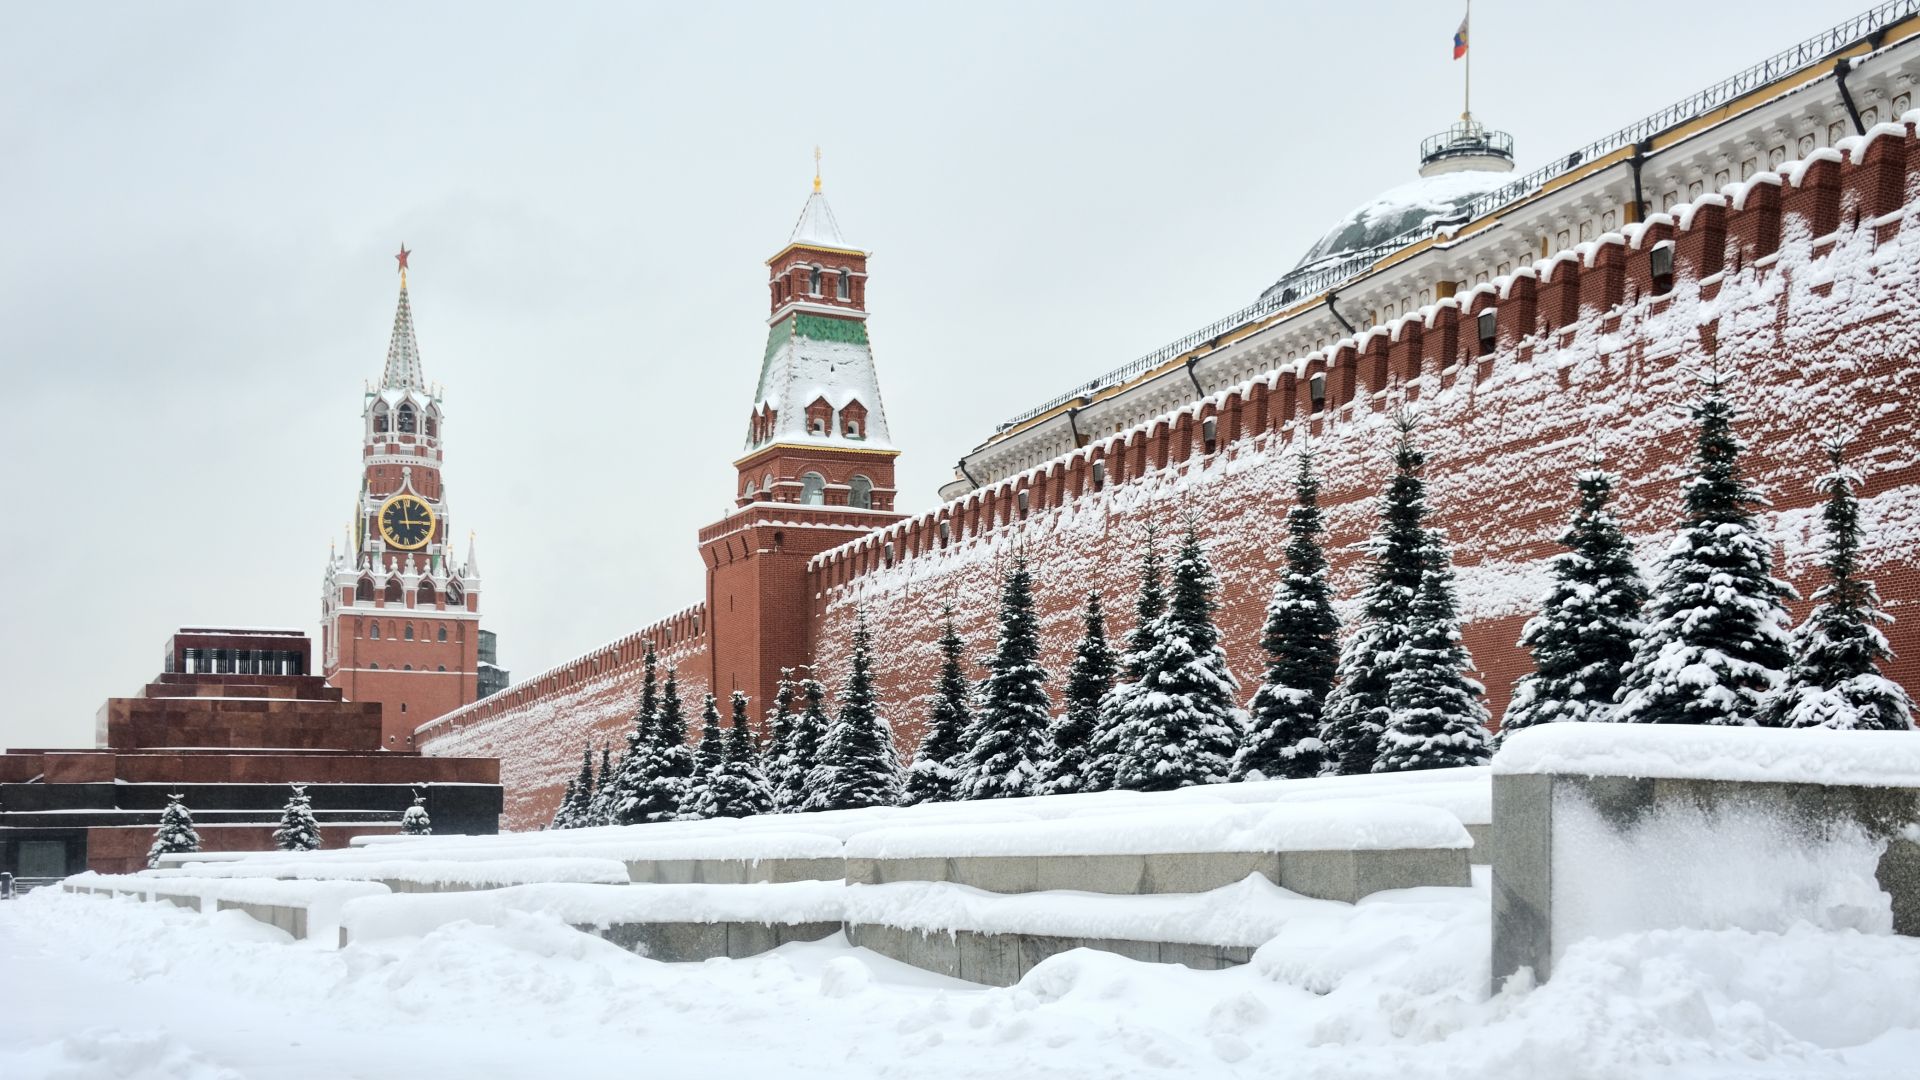 View of the Kremlin in Moscow covered in snow